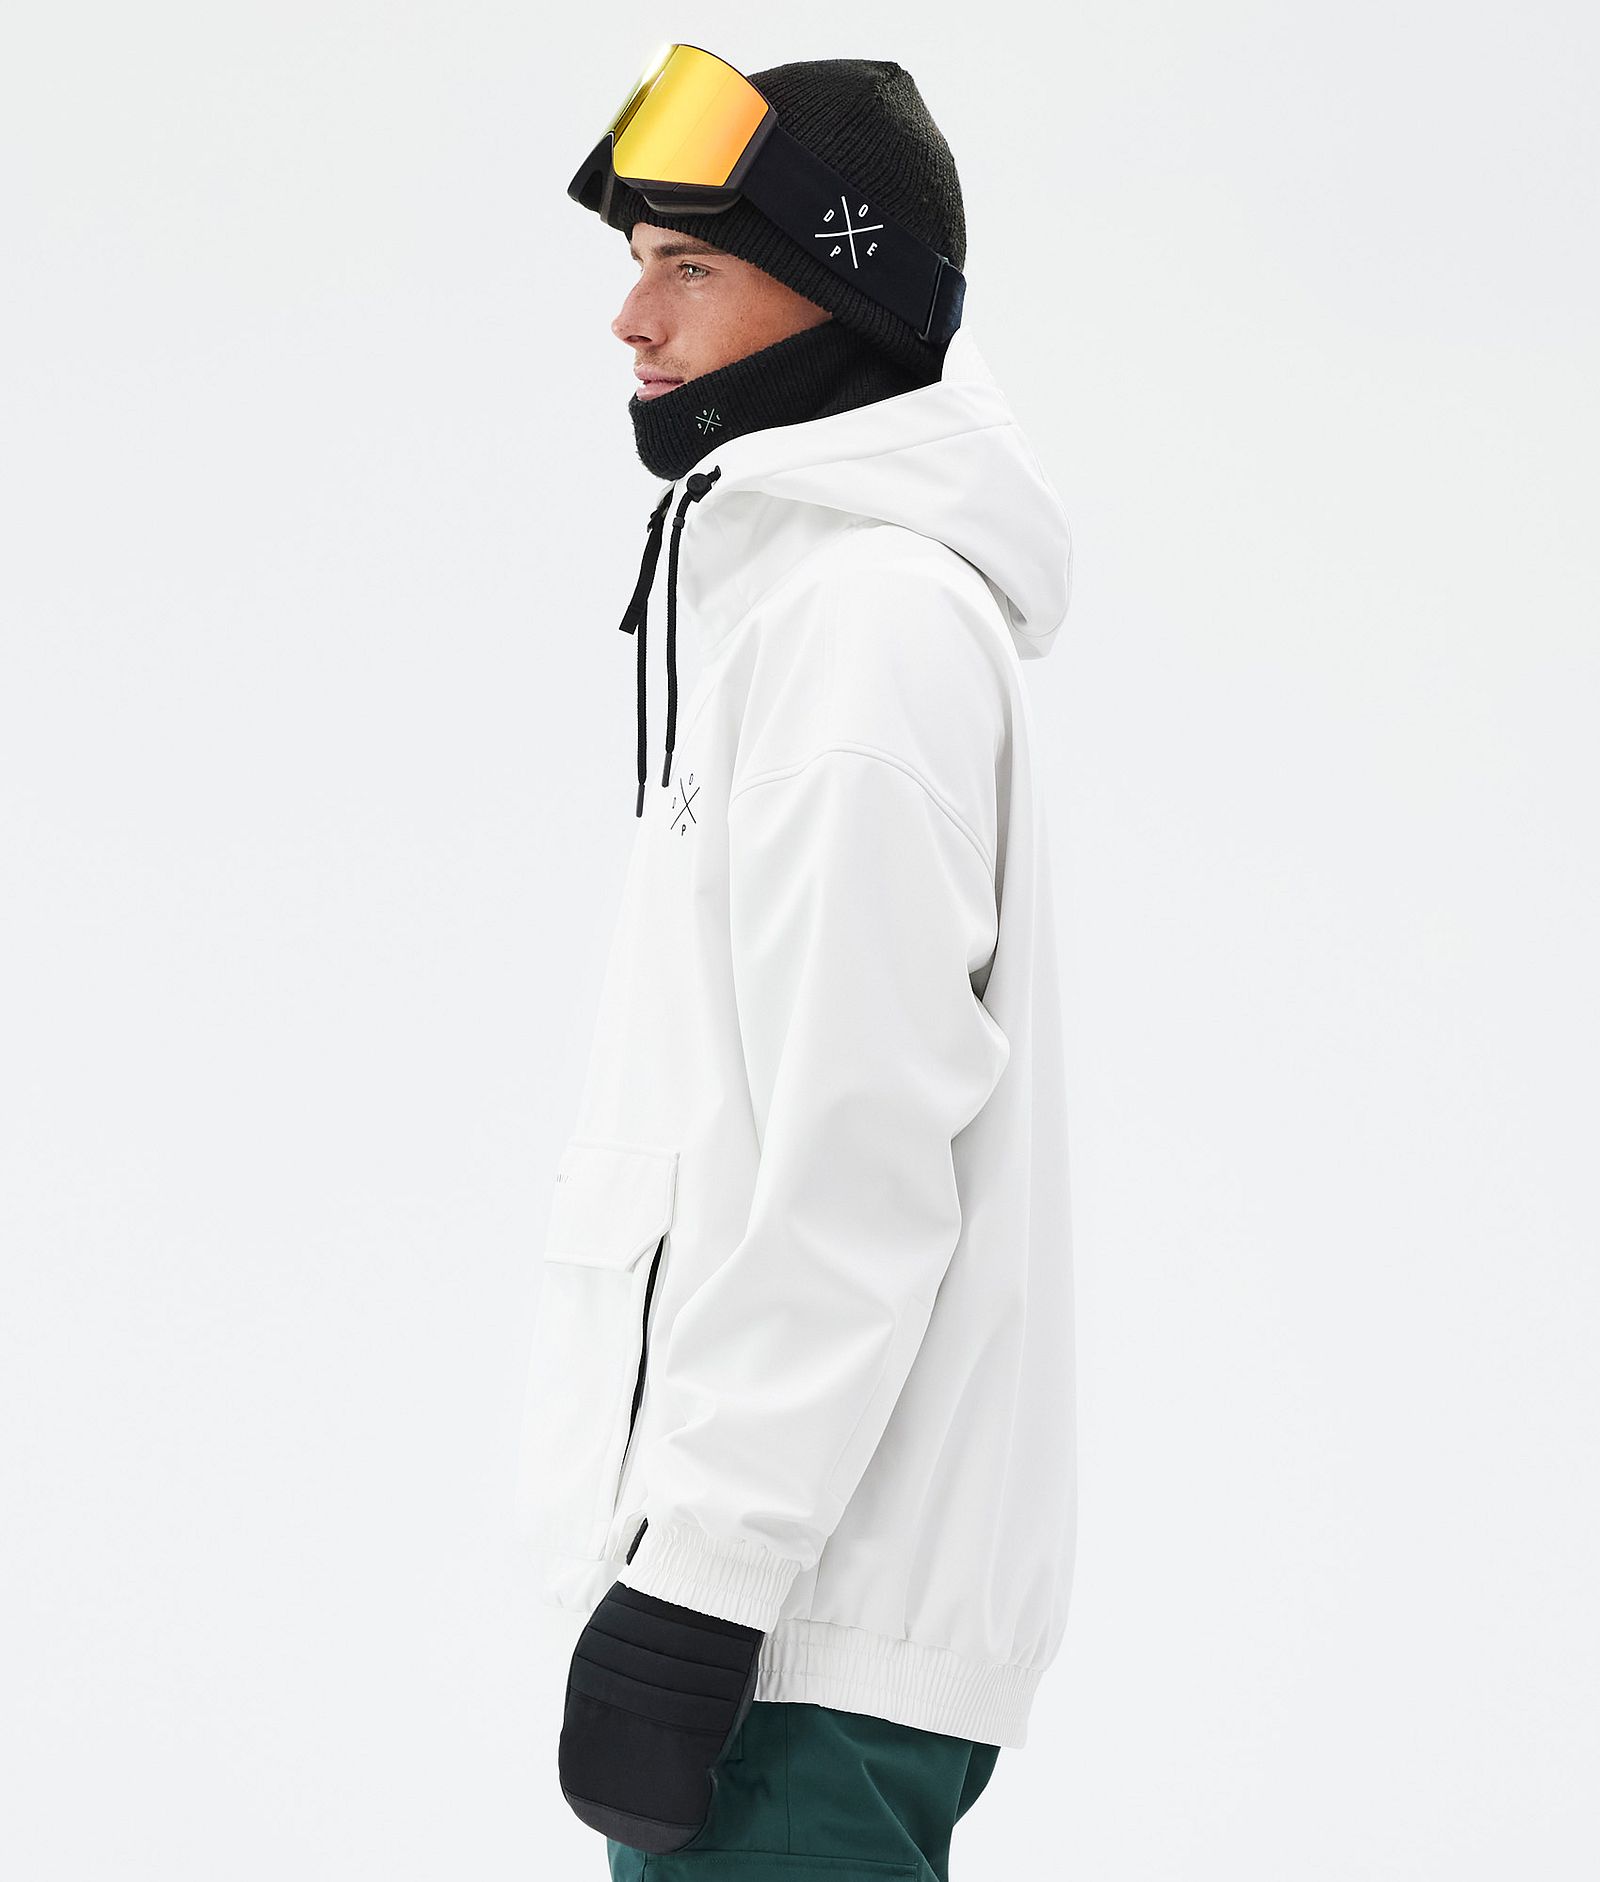 Cyclone Veste Snowboard Homme Old White, Image 6 sur 9